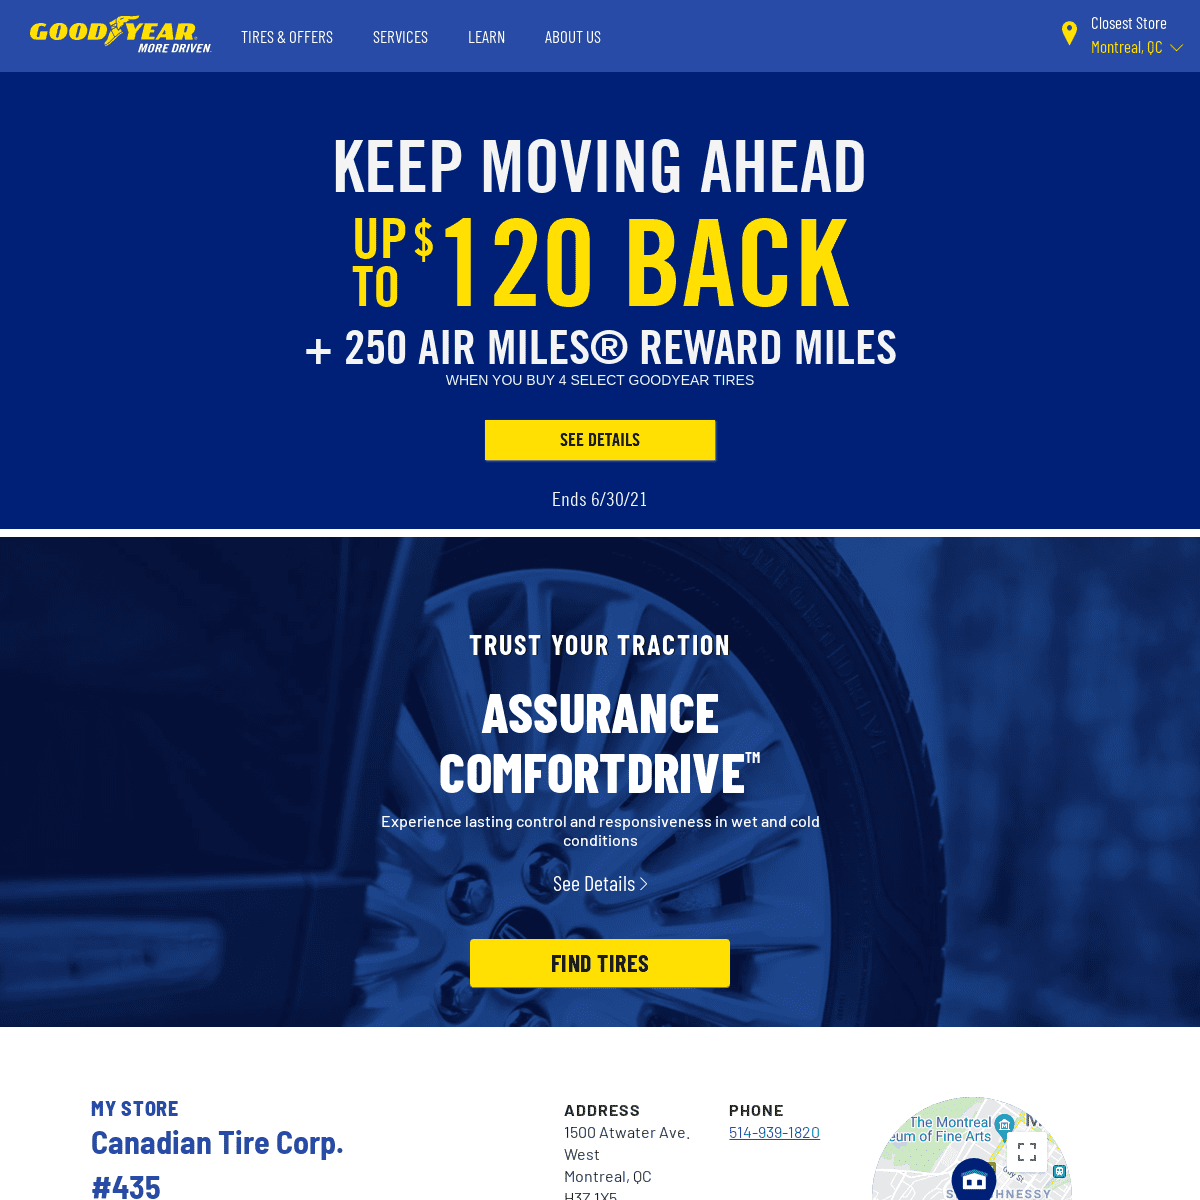 A complete backup of https://goodyear.ca